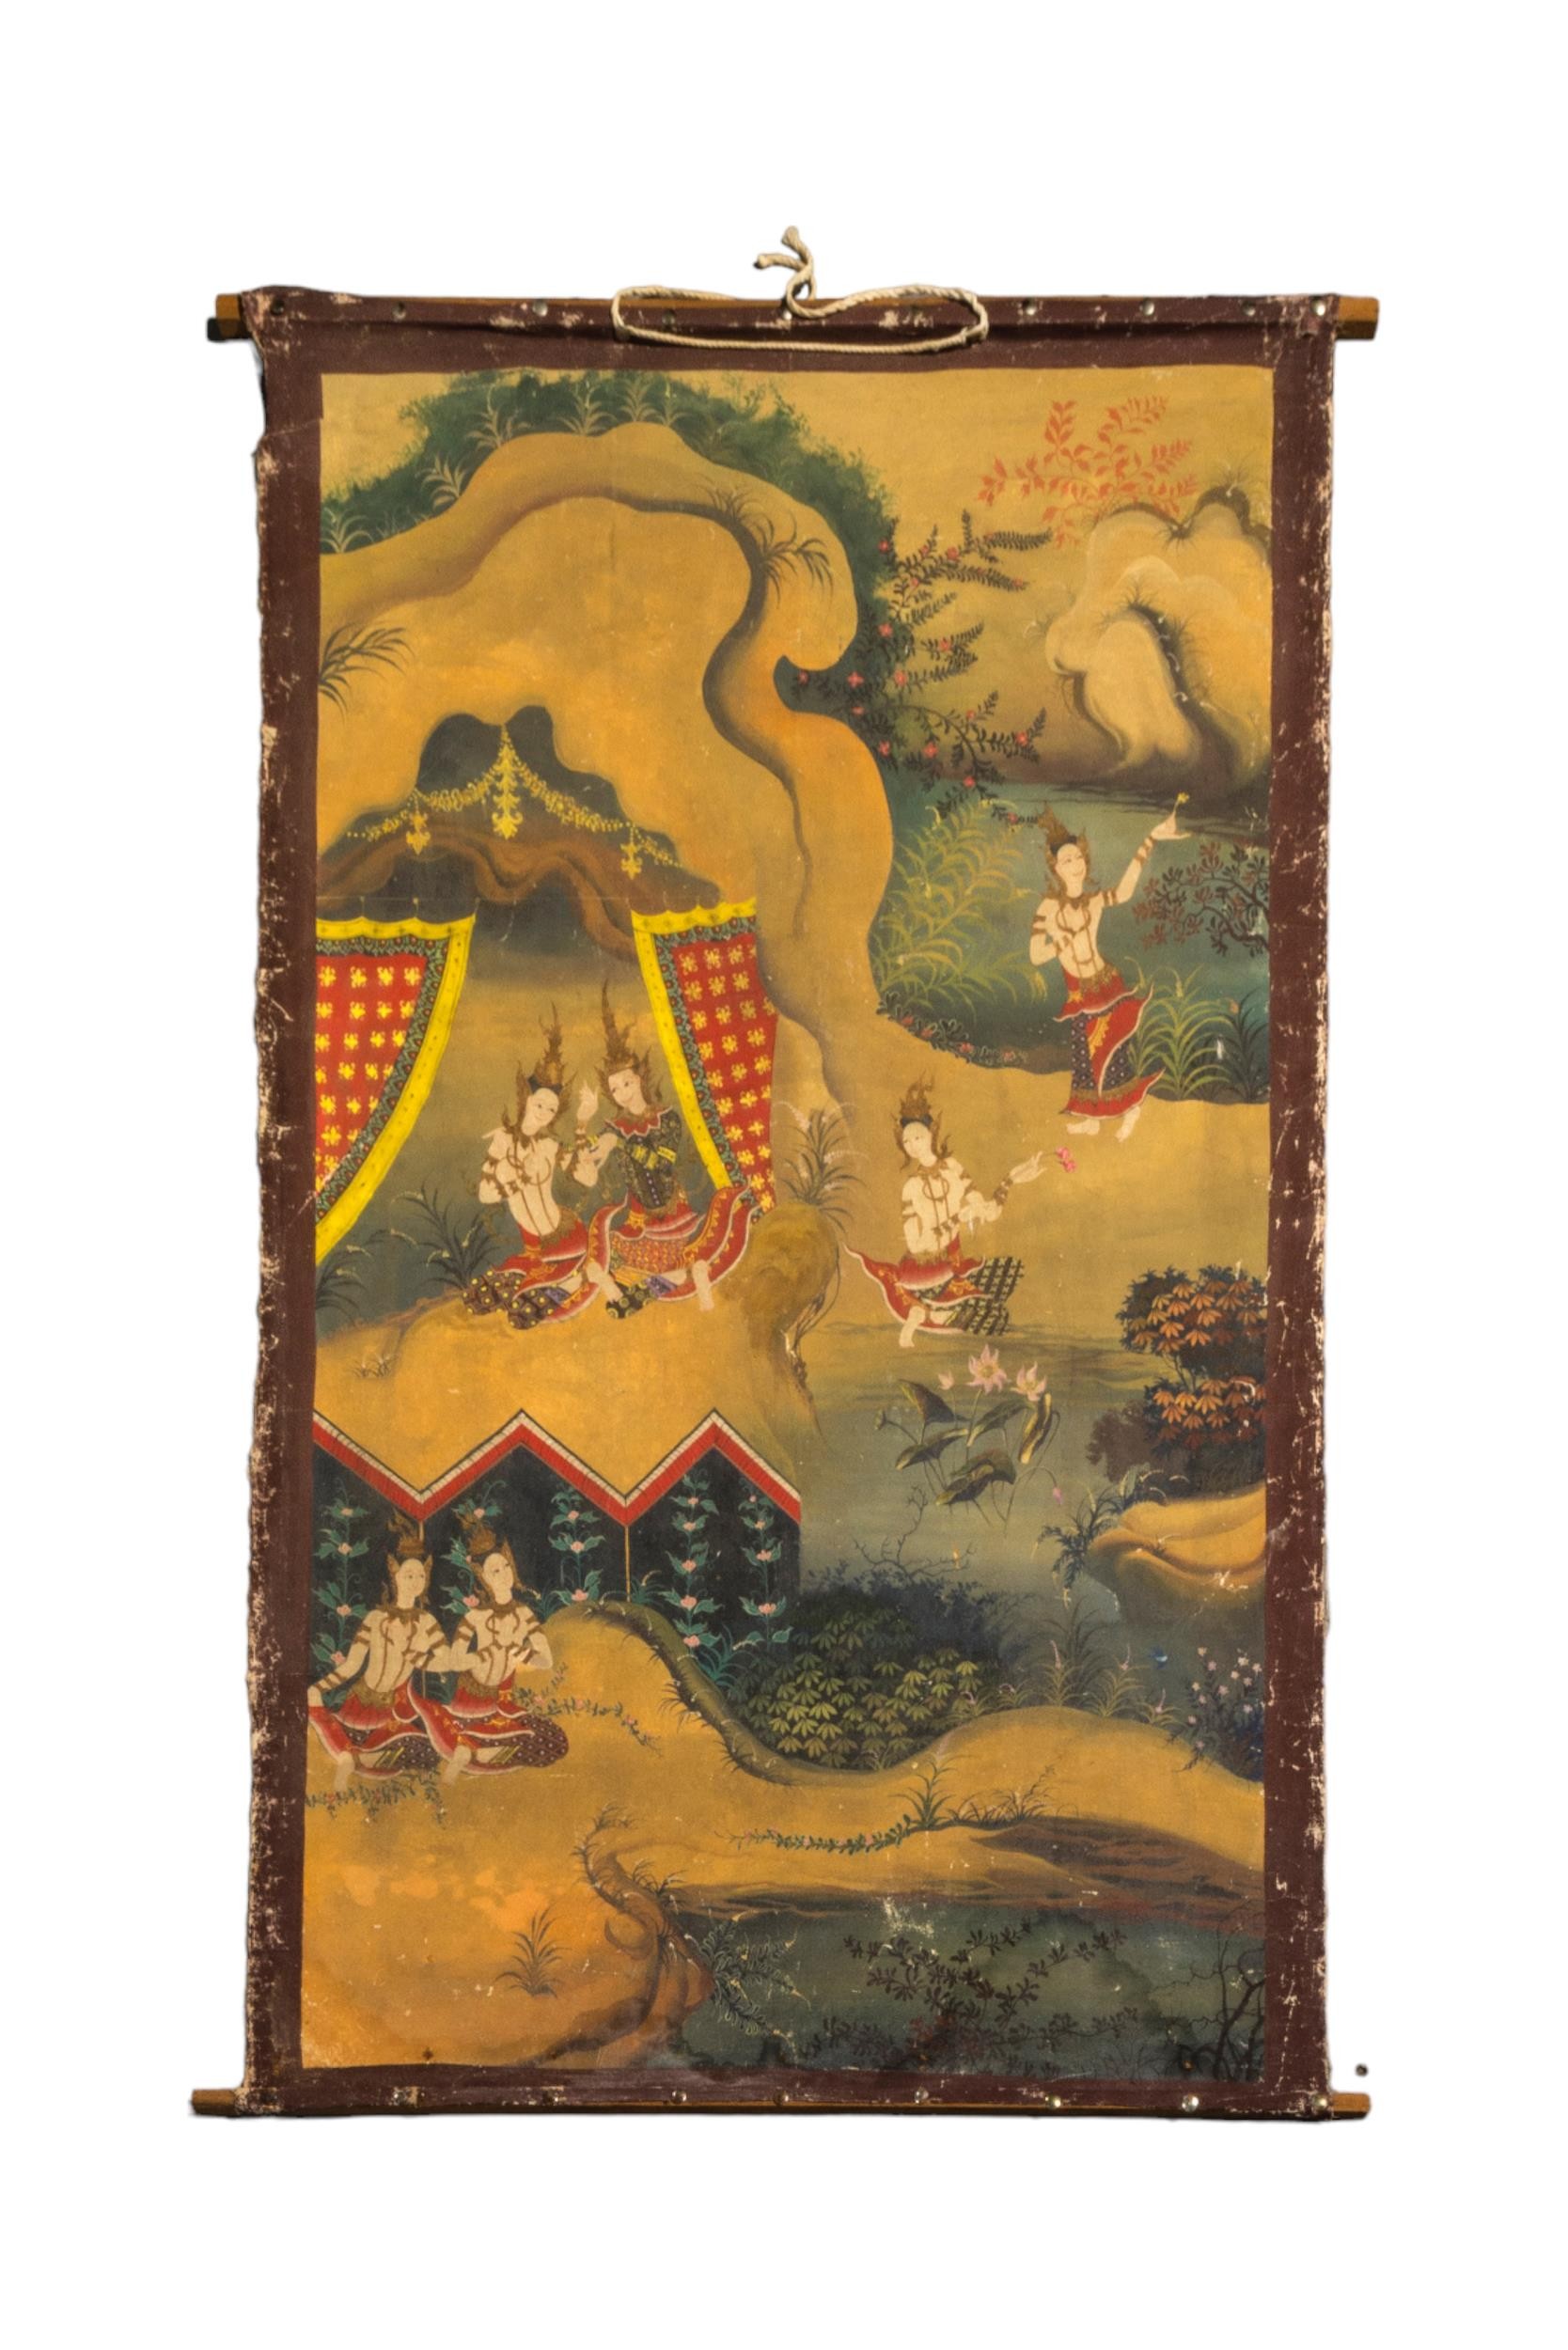 A THAI/BURMESE SCROLL DEPICTING DANCING WOMEN IN A LANDSCAPE, a Japanese scroll depicting devils - Image 5 of 5